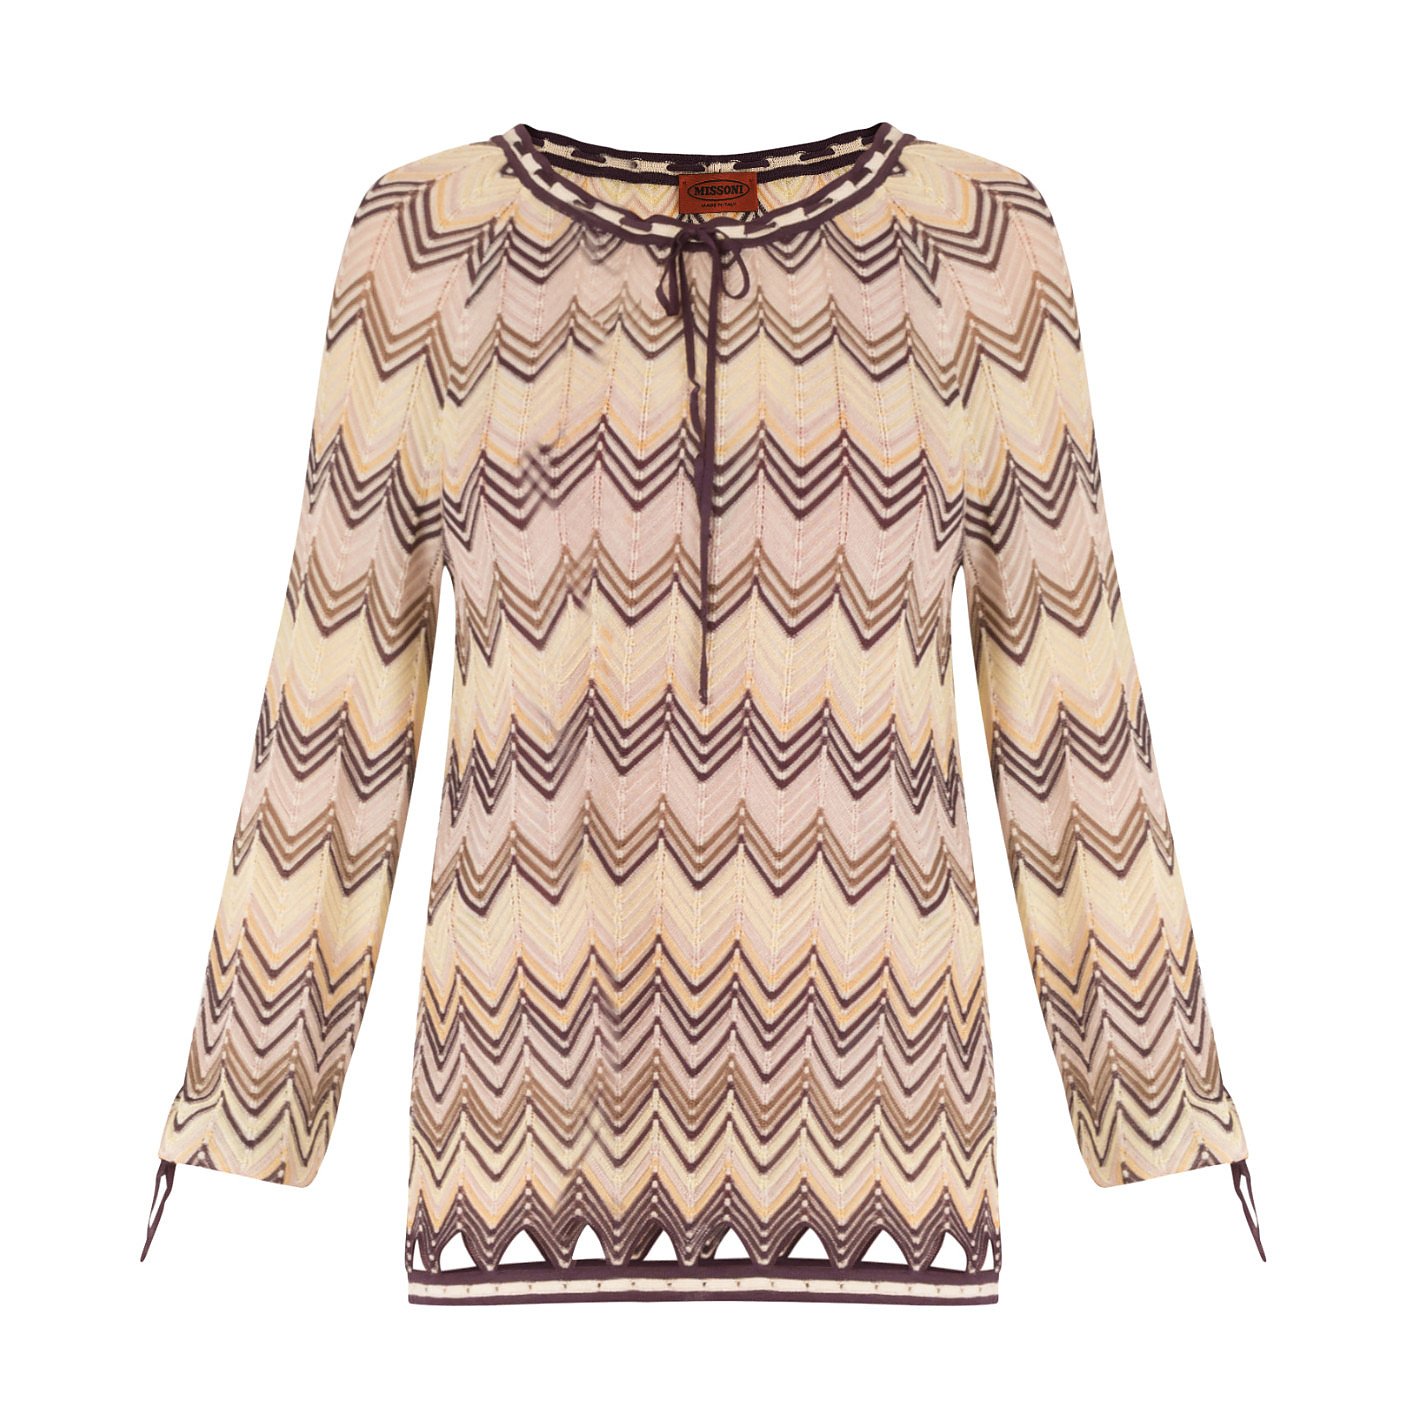 Missoni Patterned Cut-Out Knit Top